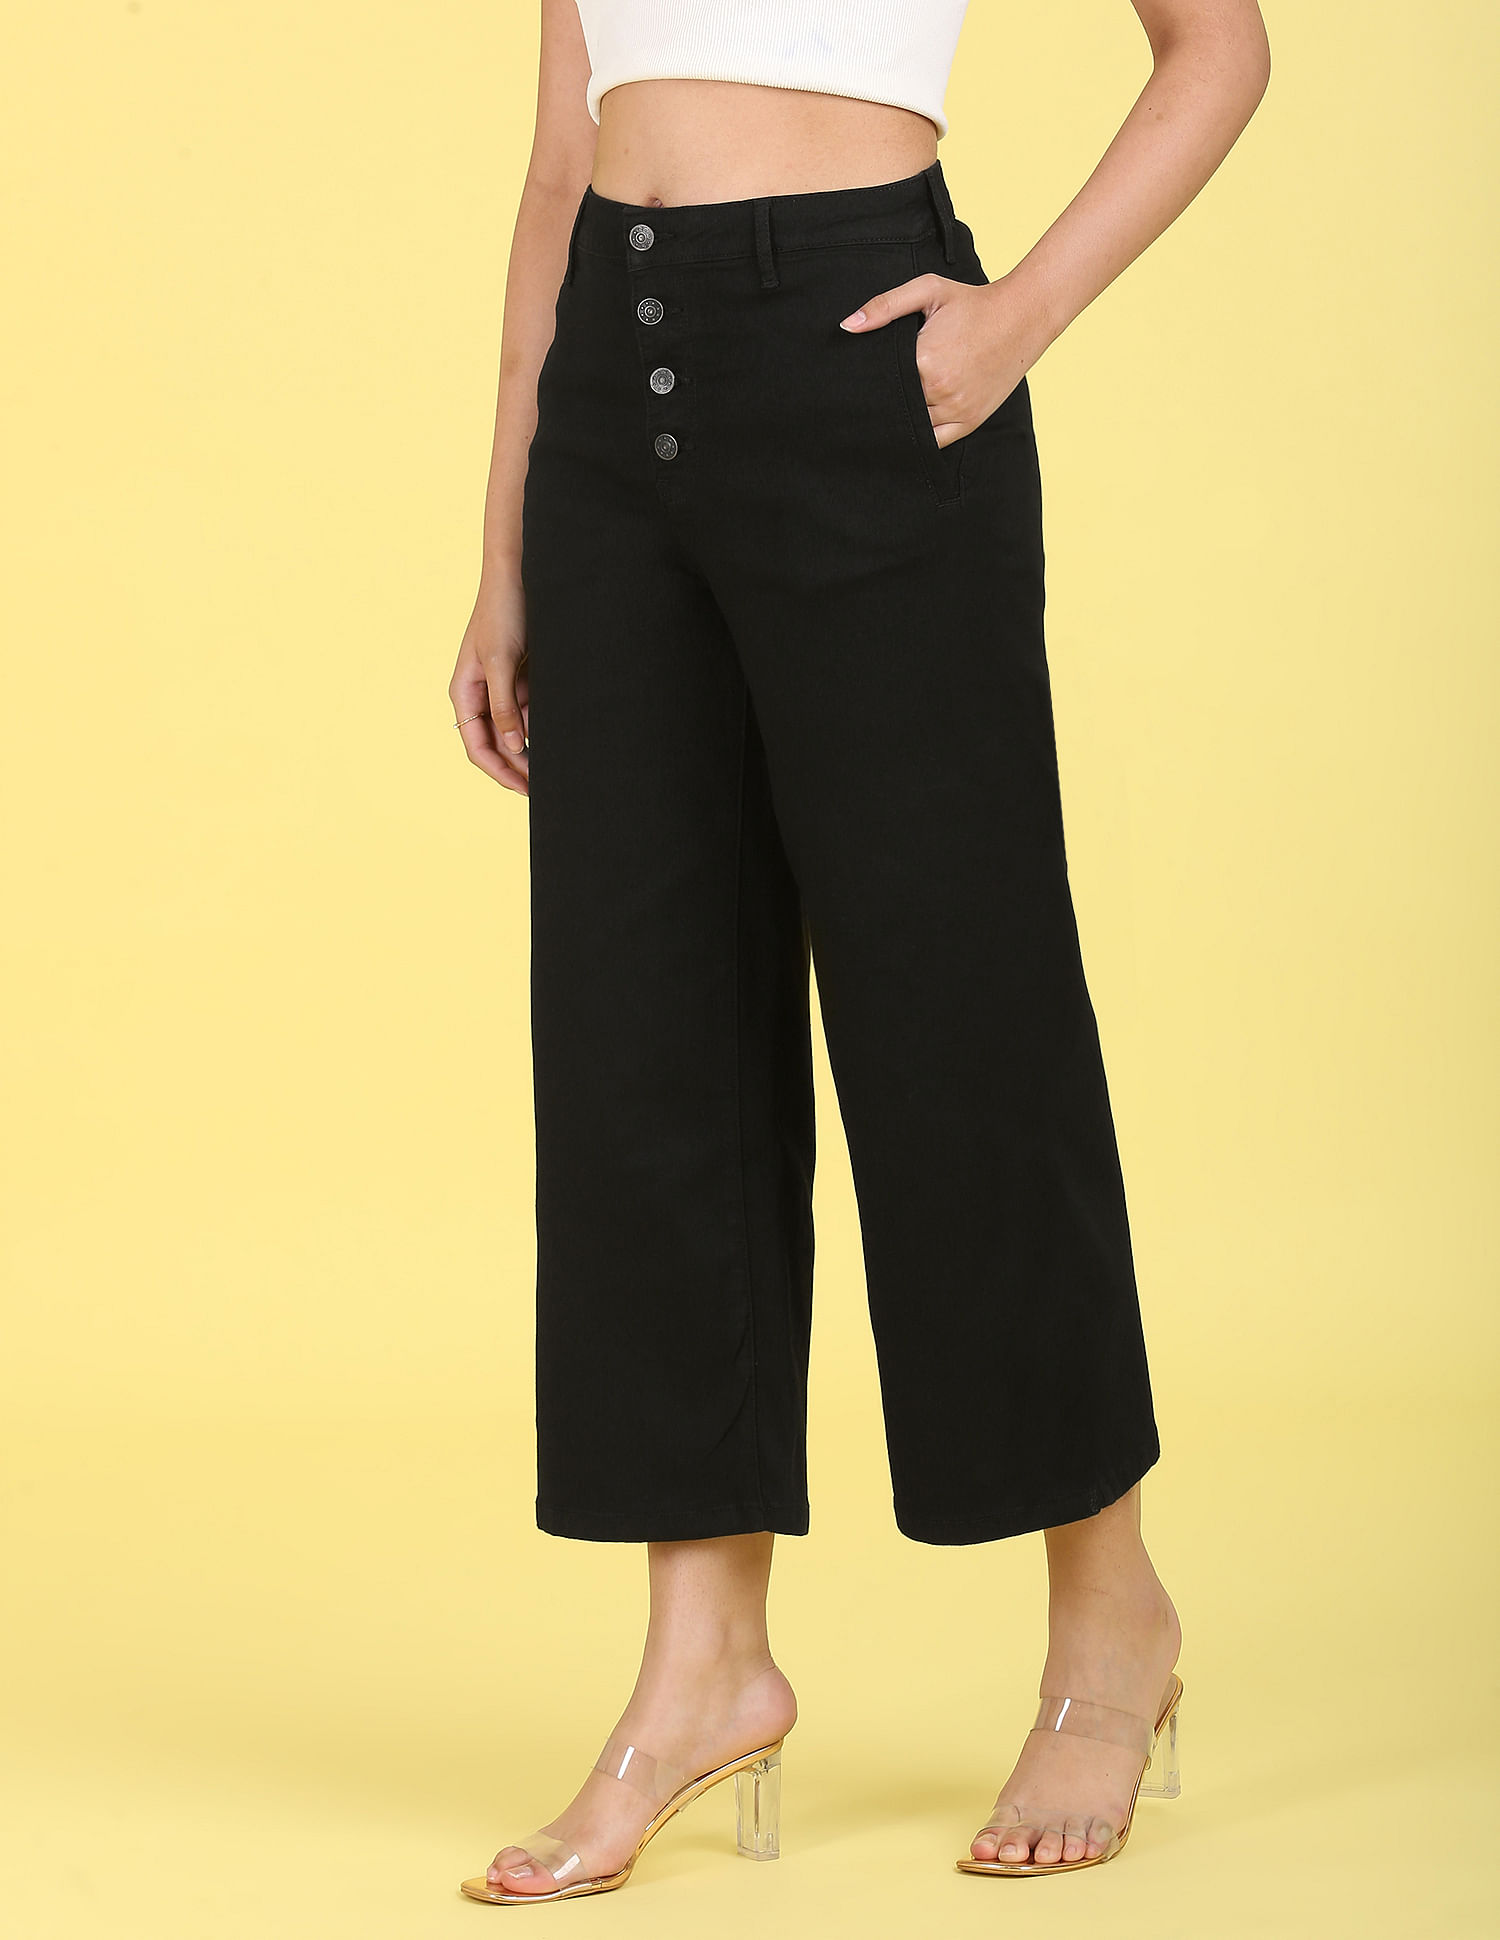 Black High Waisted Regular Fit Pants | Business attire women, Stylish work  outfits, Professional outfits women